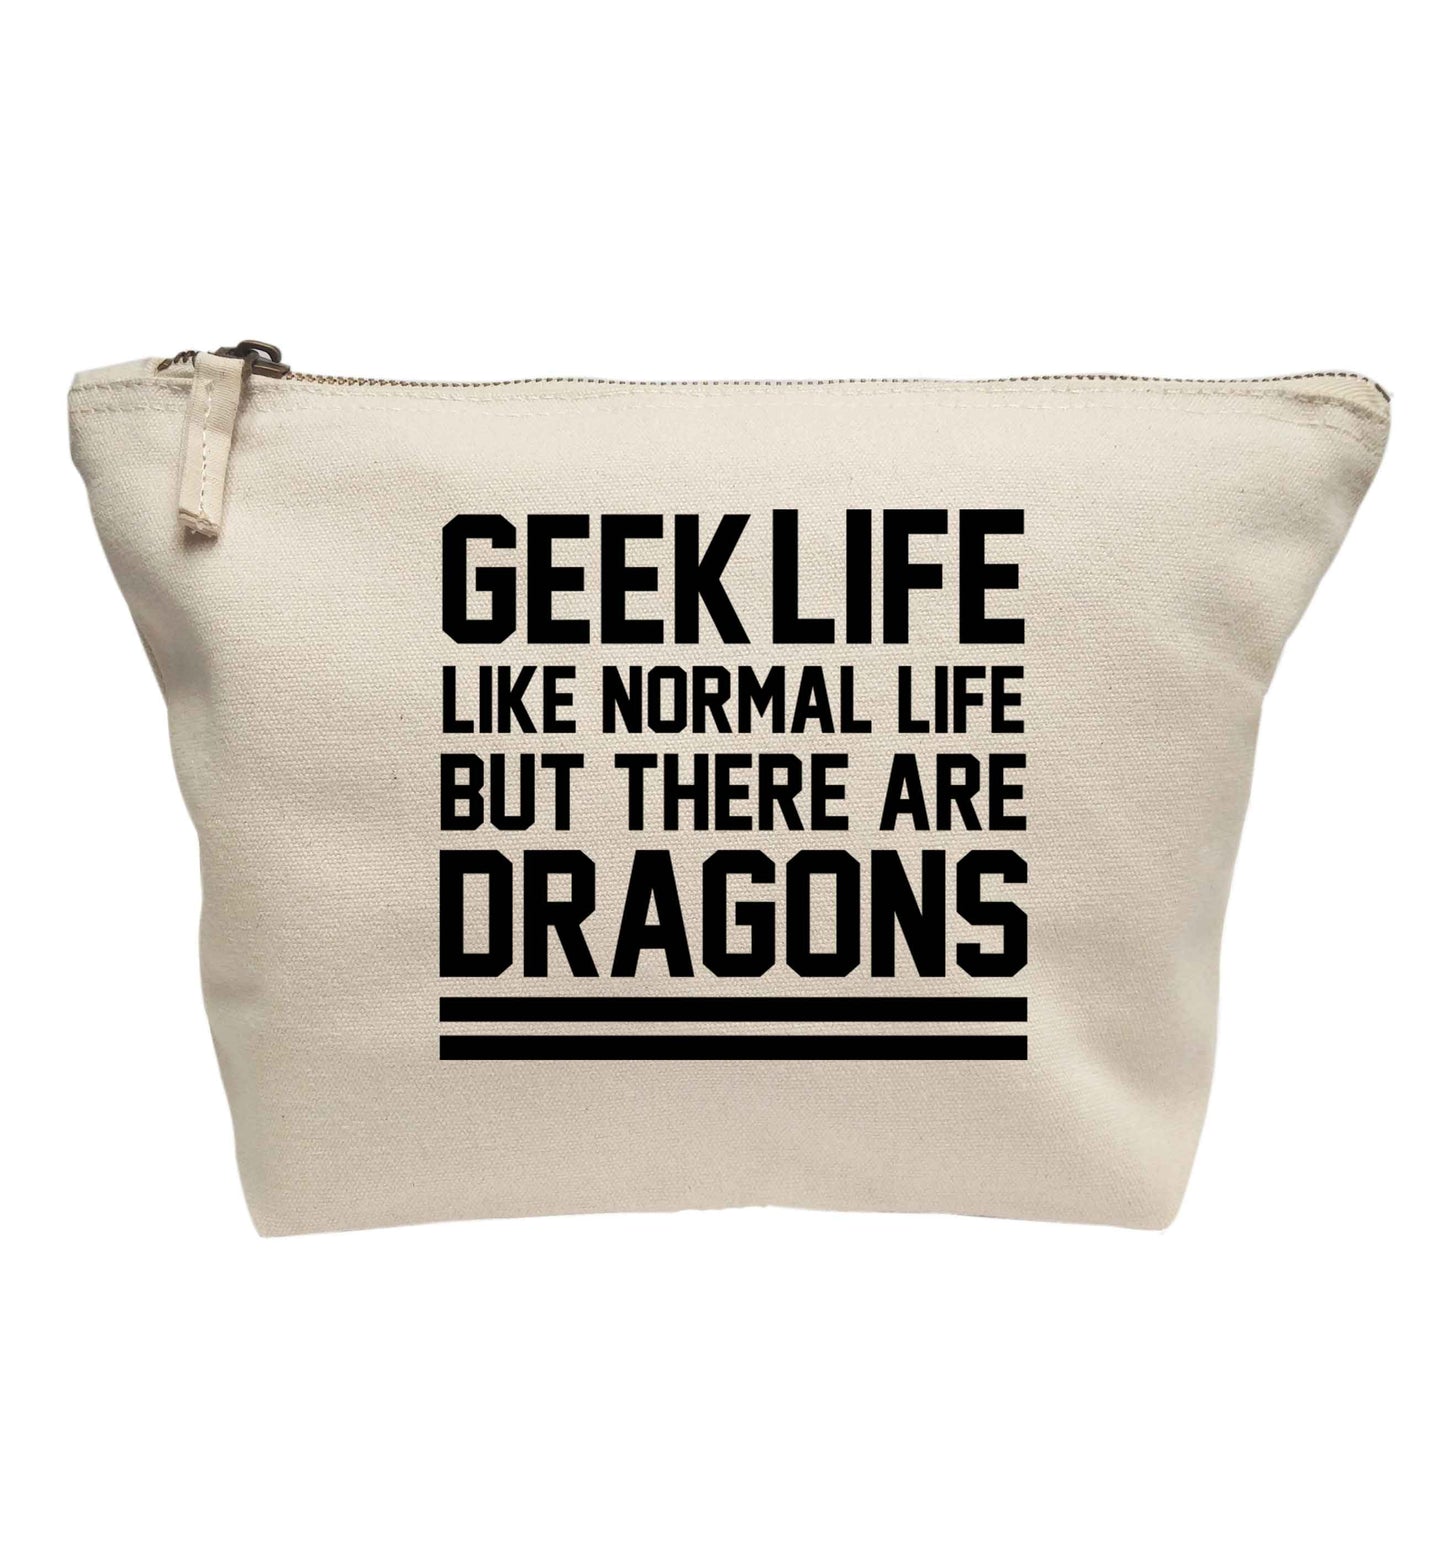 Geek life like normal life but there are dragons | Makeup / wash bag